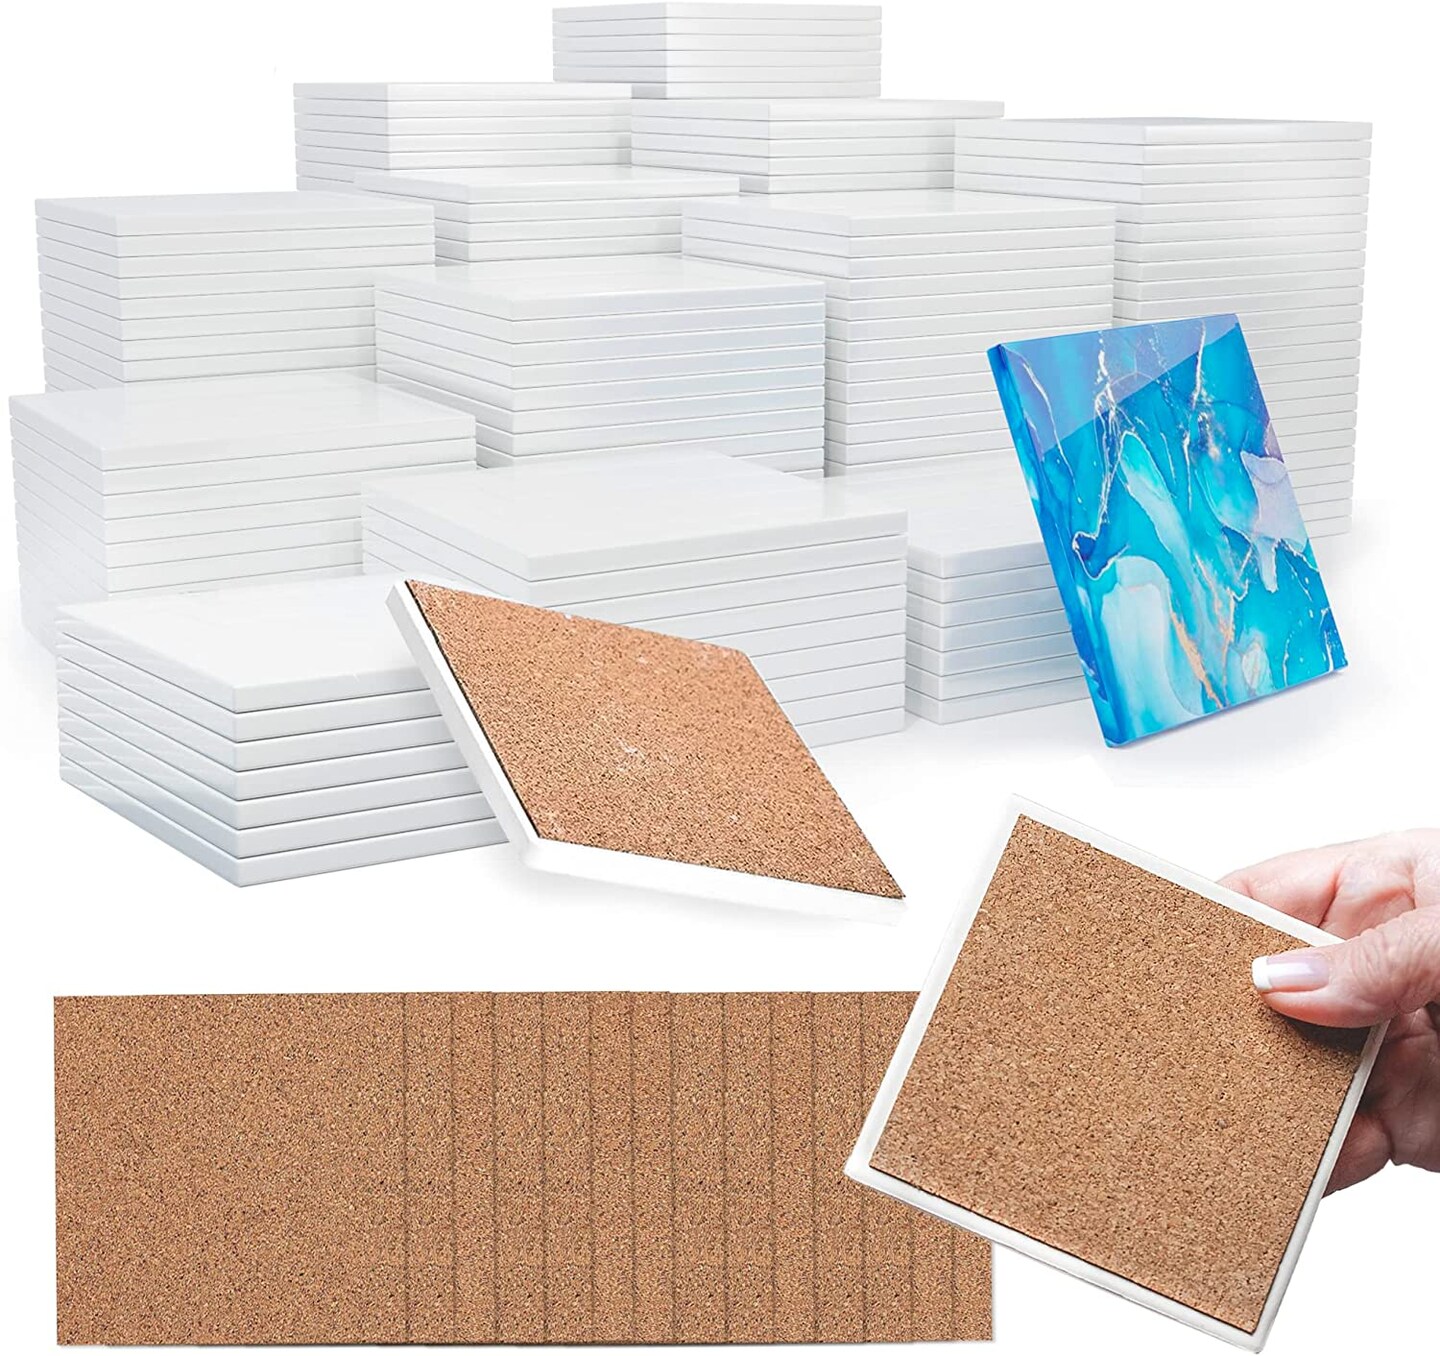 Pixiss Glazed Glossy White Coasters - Square 100 Pack